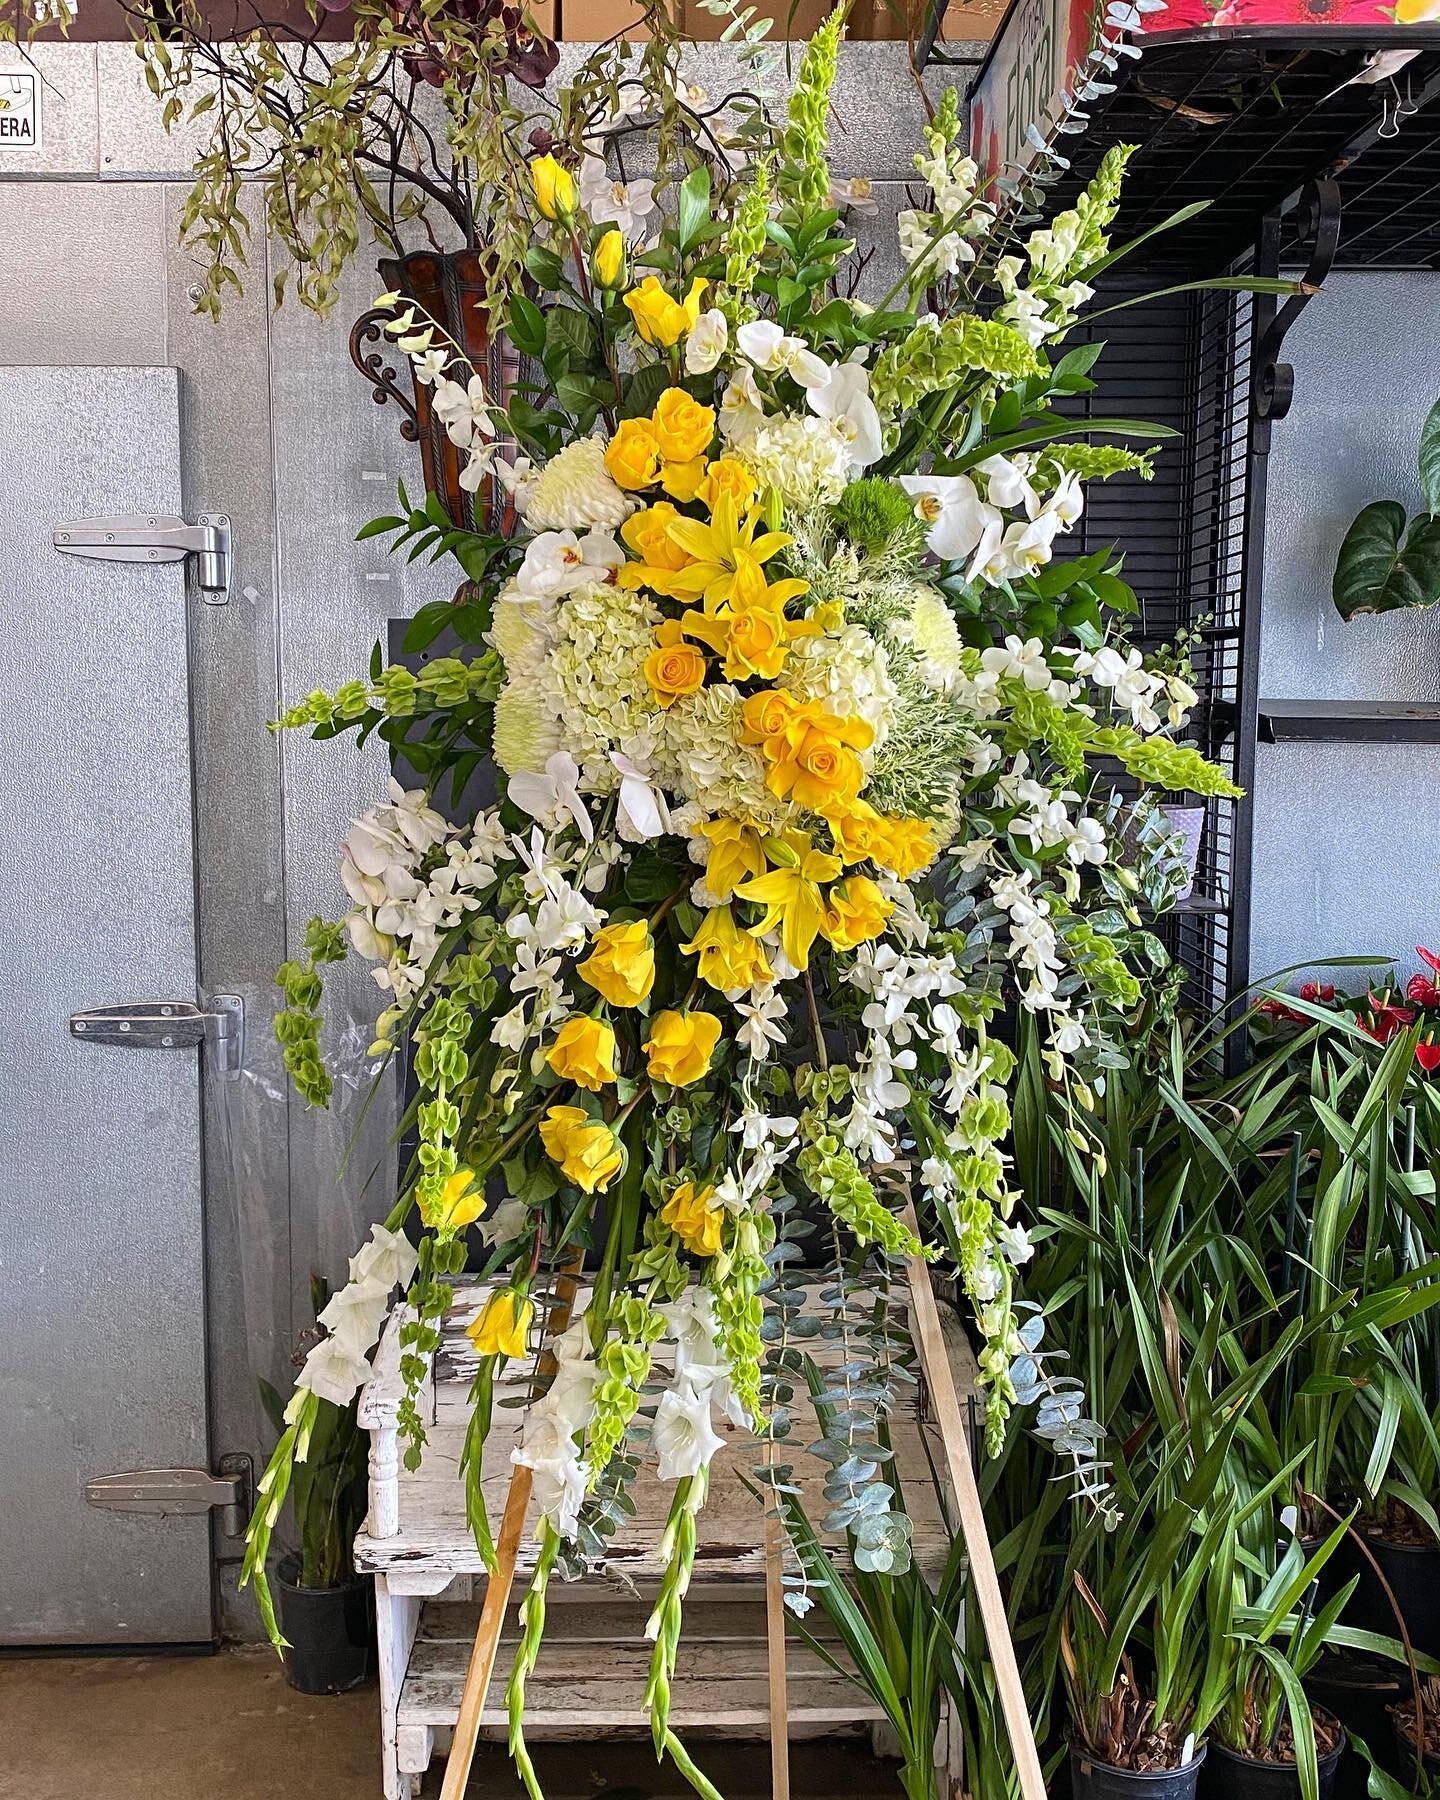 A beautiful standing Arrangement, highlighted with bright yellow roses and lilies☀️

What do you think? 

	&bull;	

	&bull;	

	&bull;	

#ocflorist #ocflowers #momhobby #hobbies #hobby #flowersofinstagram #flowerstands #socalmoms #socalliving #momsofi